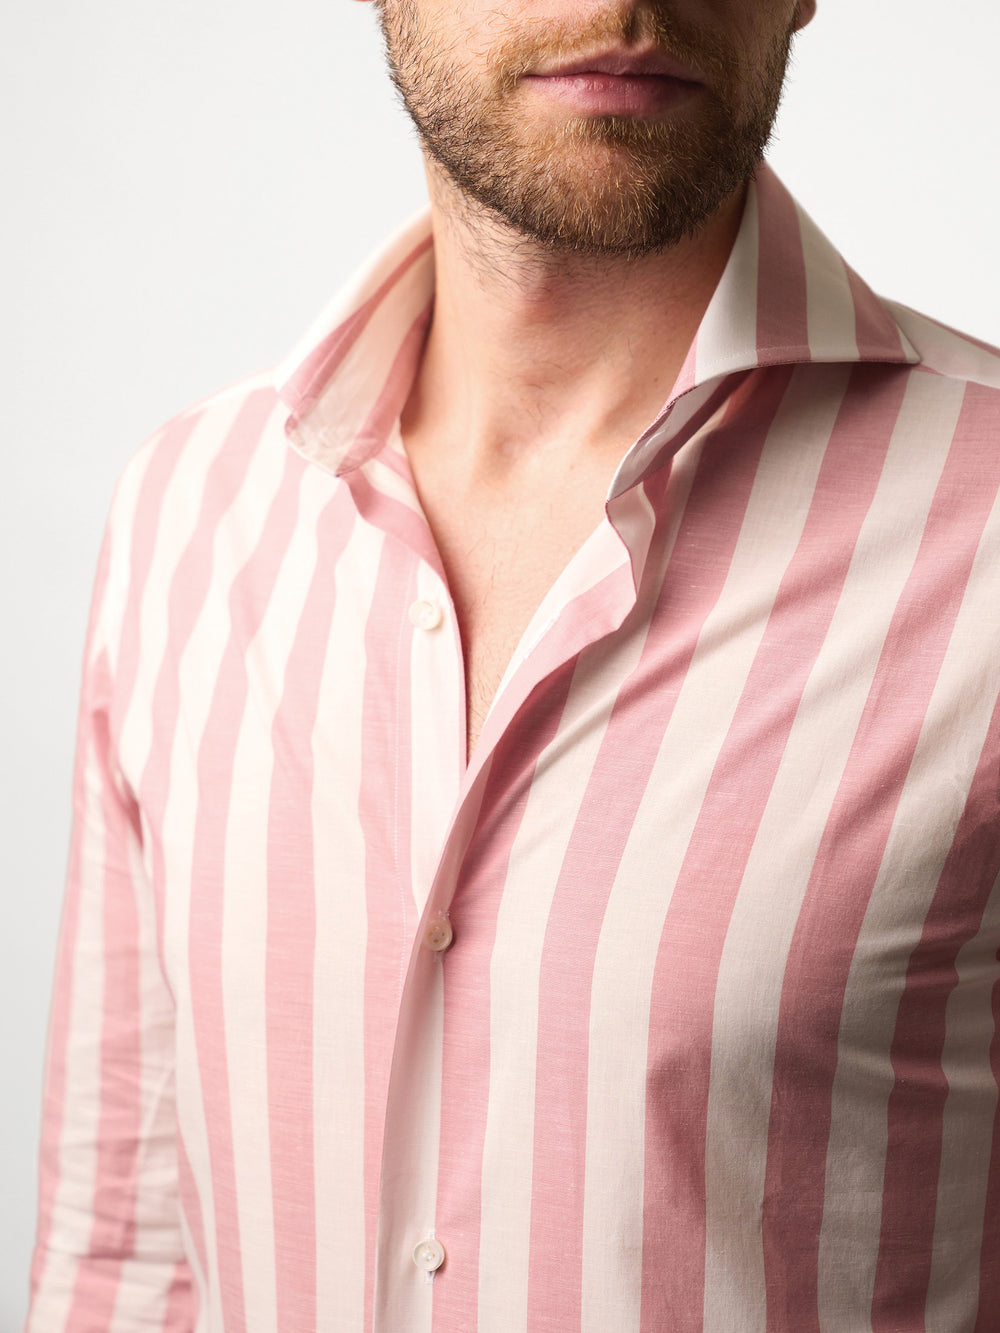 Casual Striped White/Pink Shirt